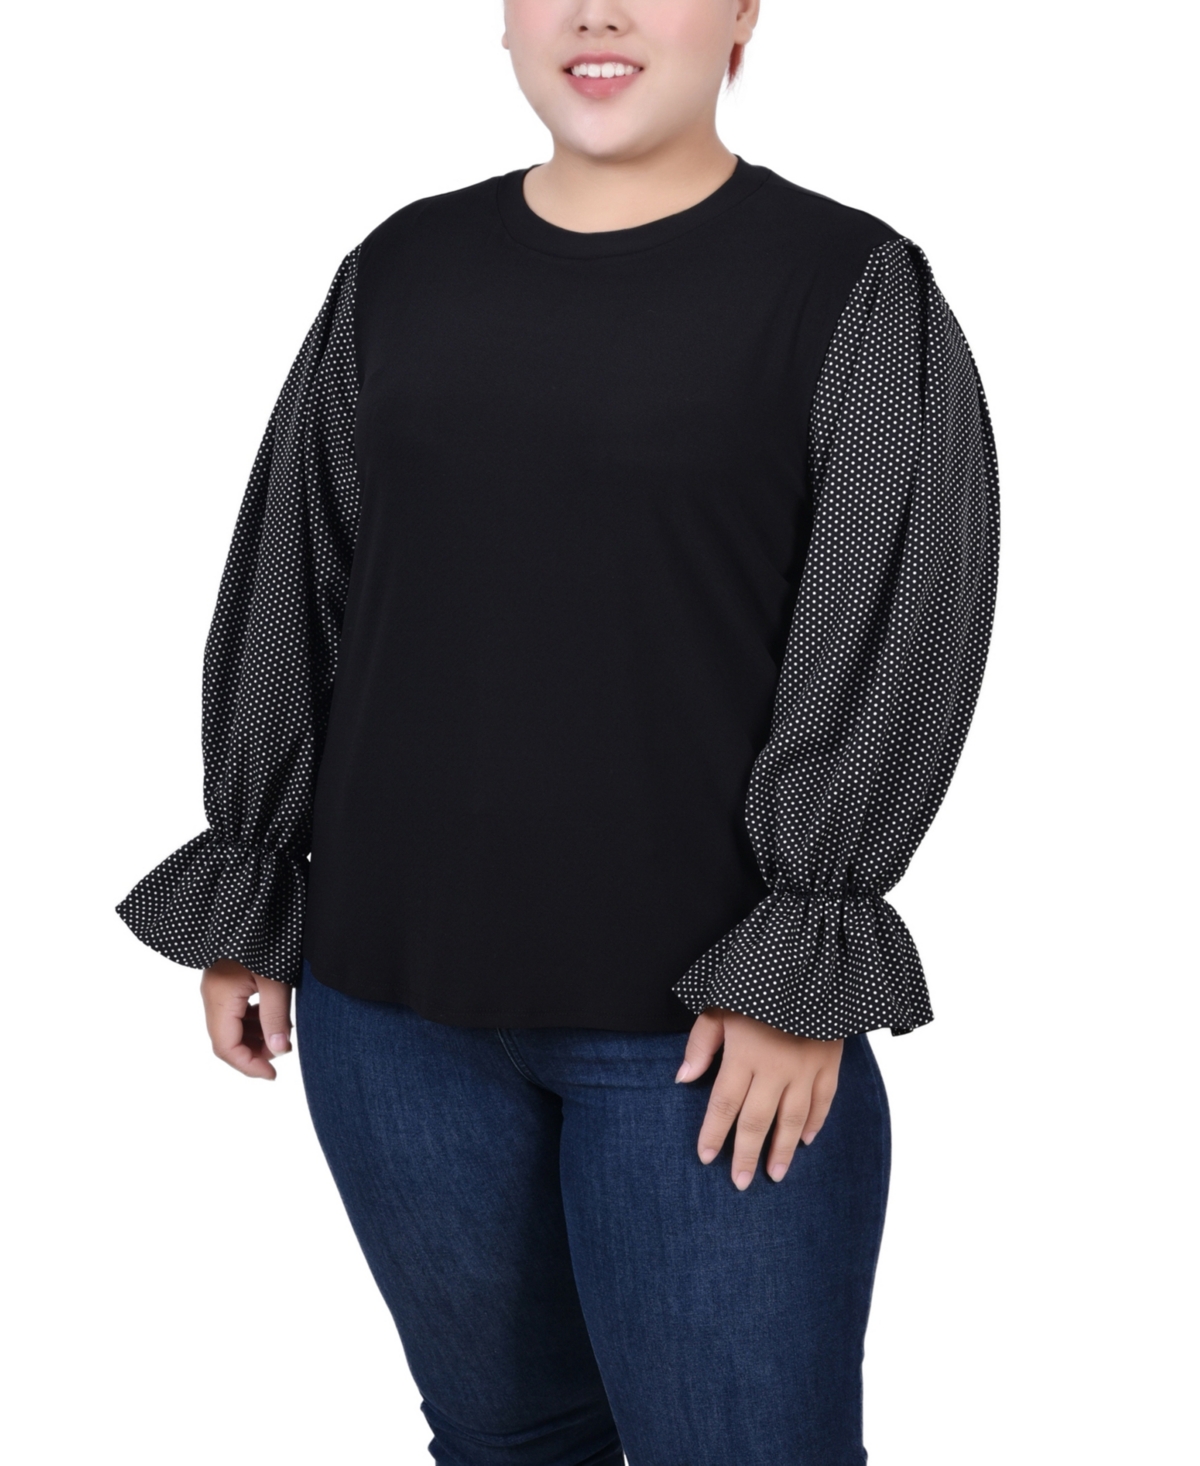 Plus Size Long Sleeve Top with Printed Sleeves - Black White Dot